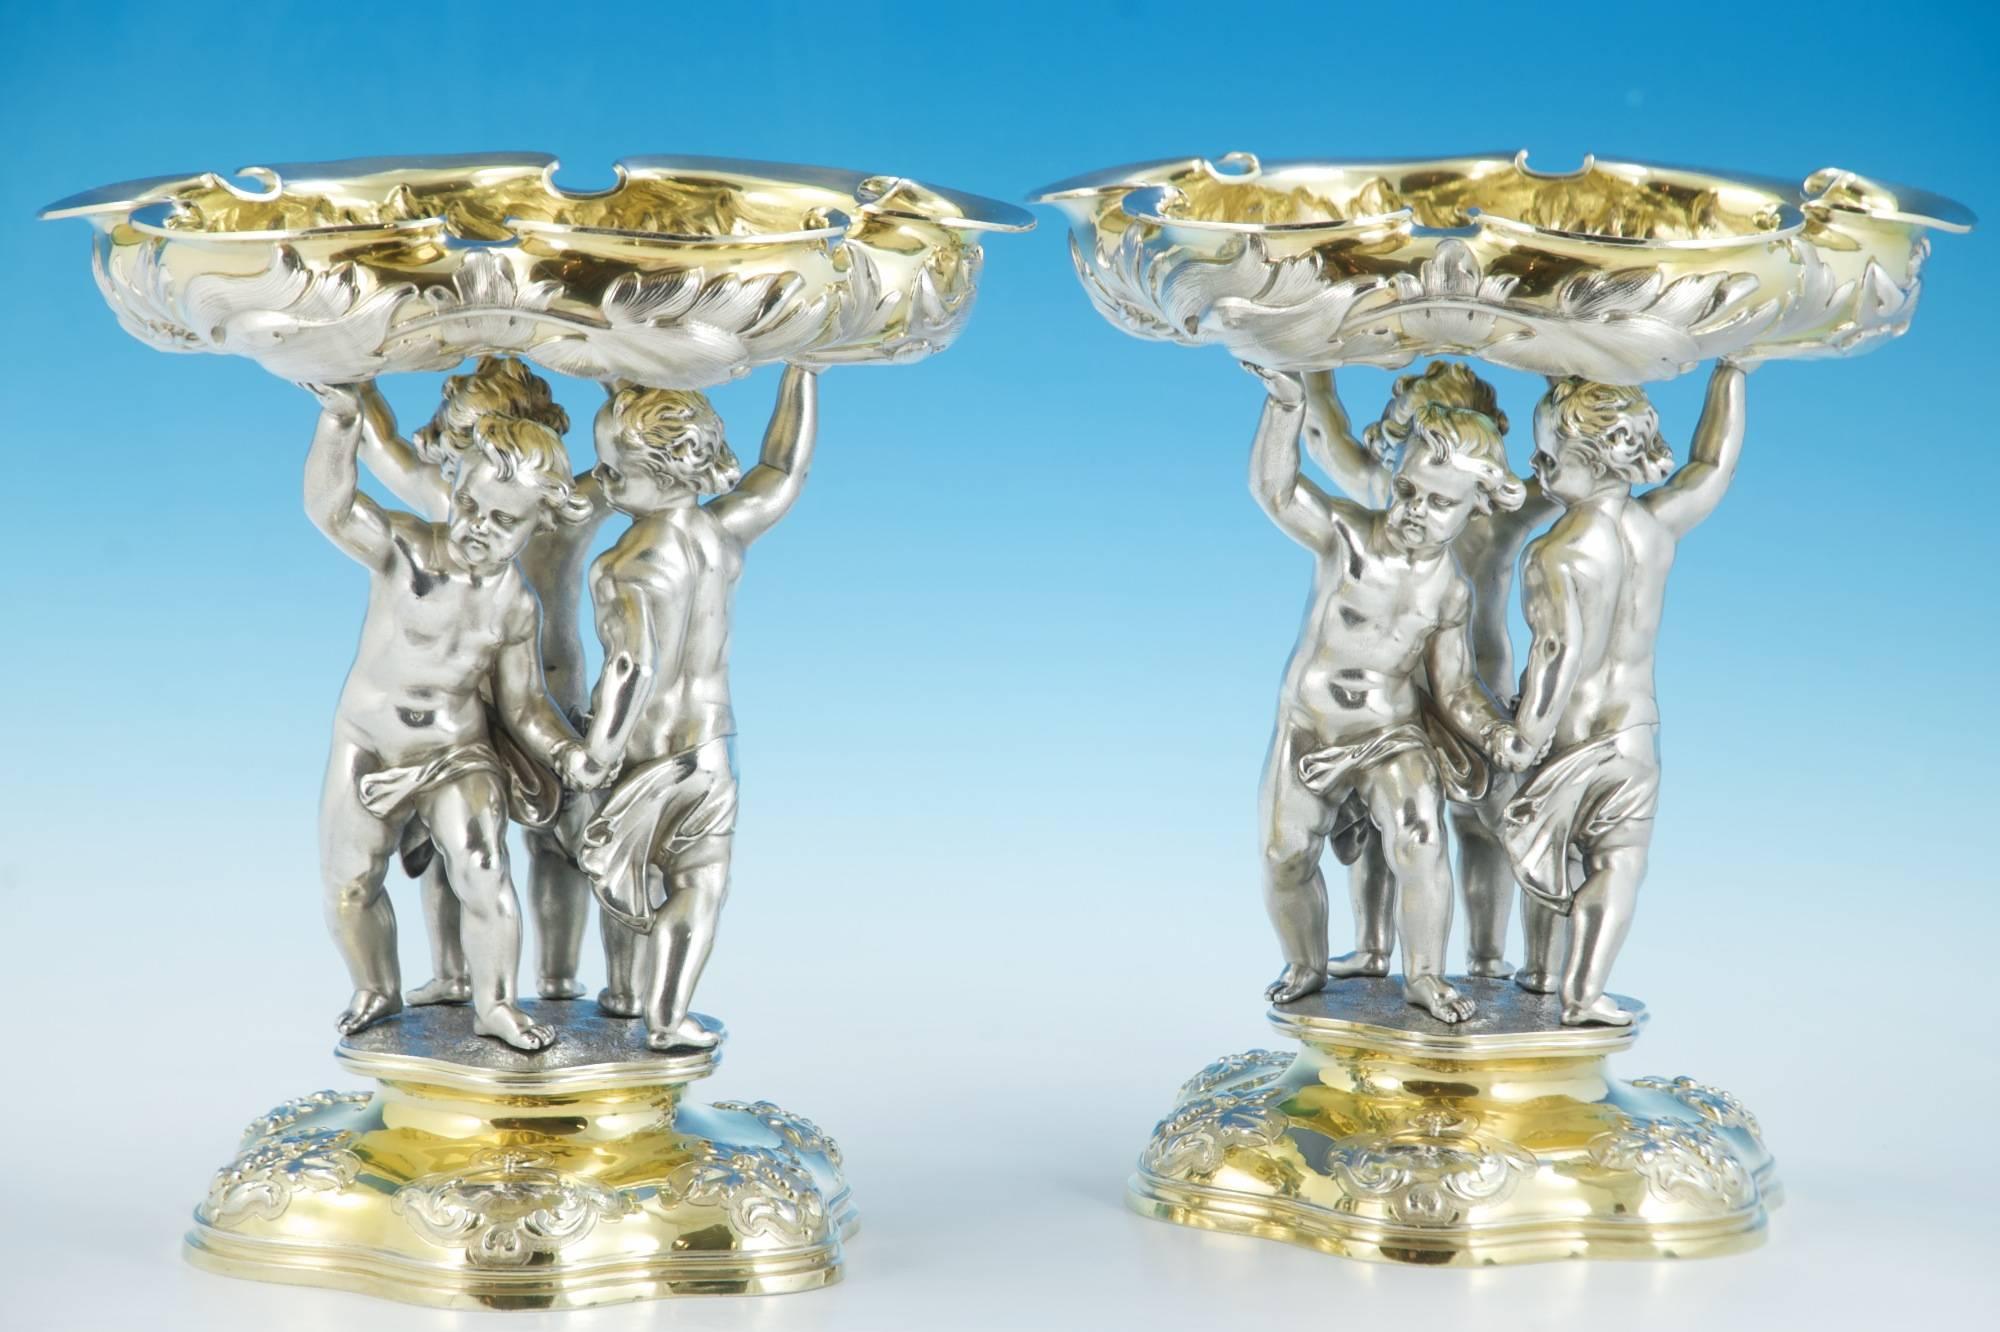 Superb Parcel-Gilt Sterling-Silver Centerpiece and Pair of Comports For Sale 1